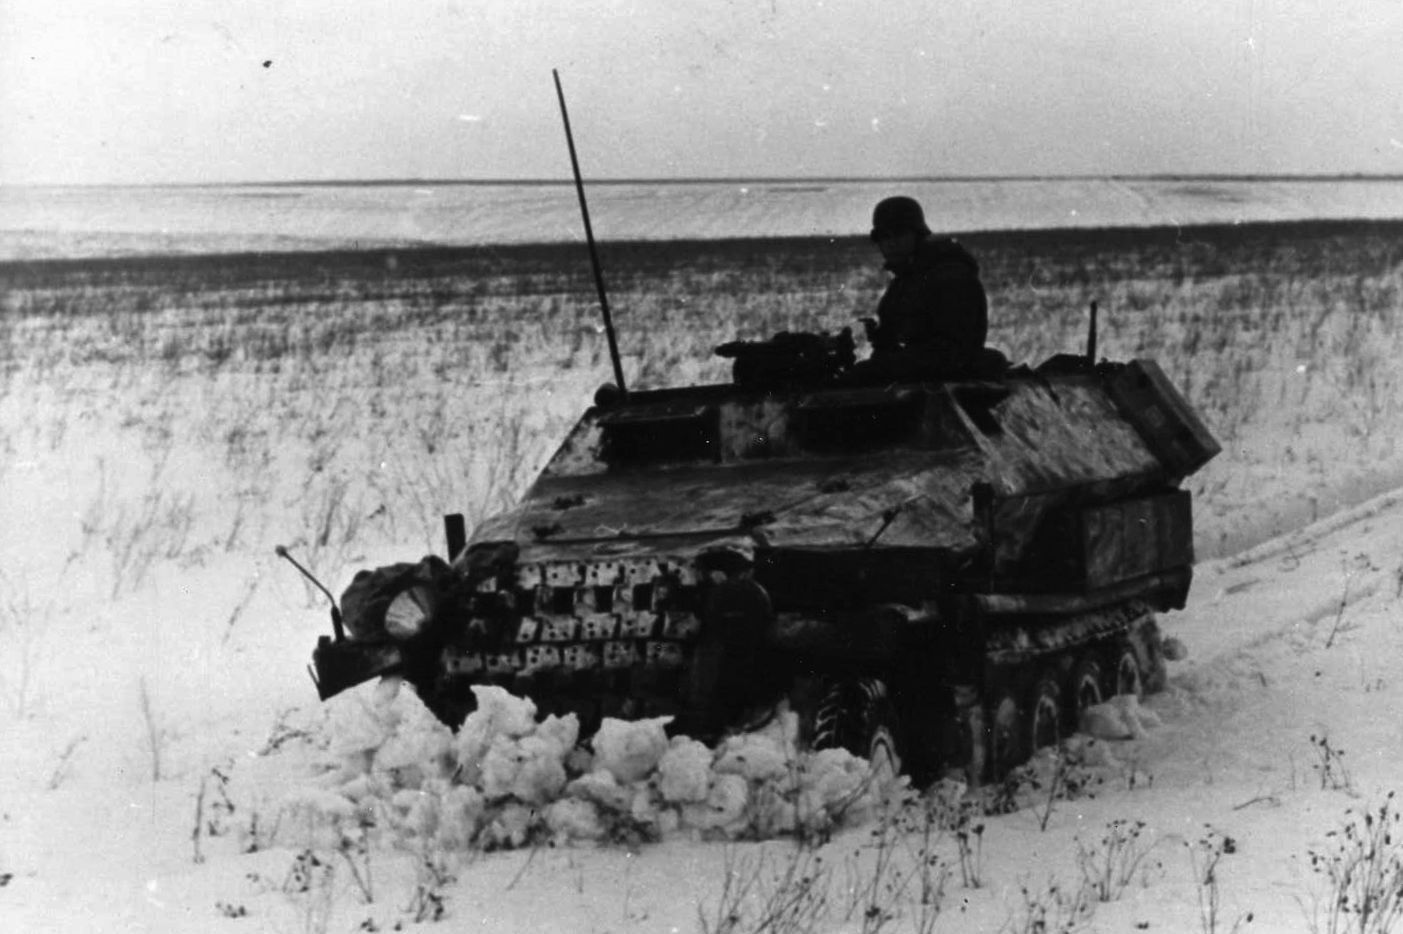 Battling the intense cold and winter weather as well as the invading Germans, a Soviet patrol and its armored half-track forge their way through a snowy field on the Russian steppe during the winter of 1942. 